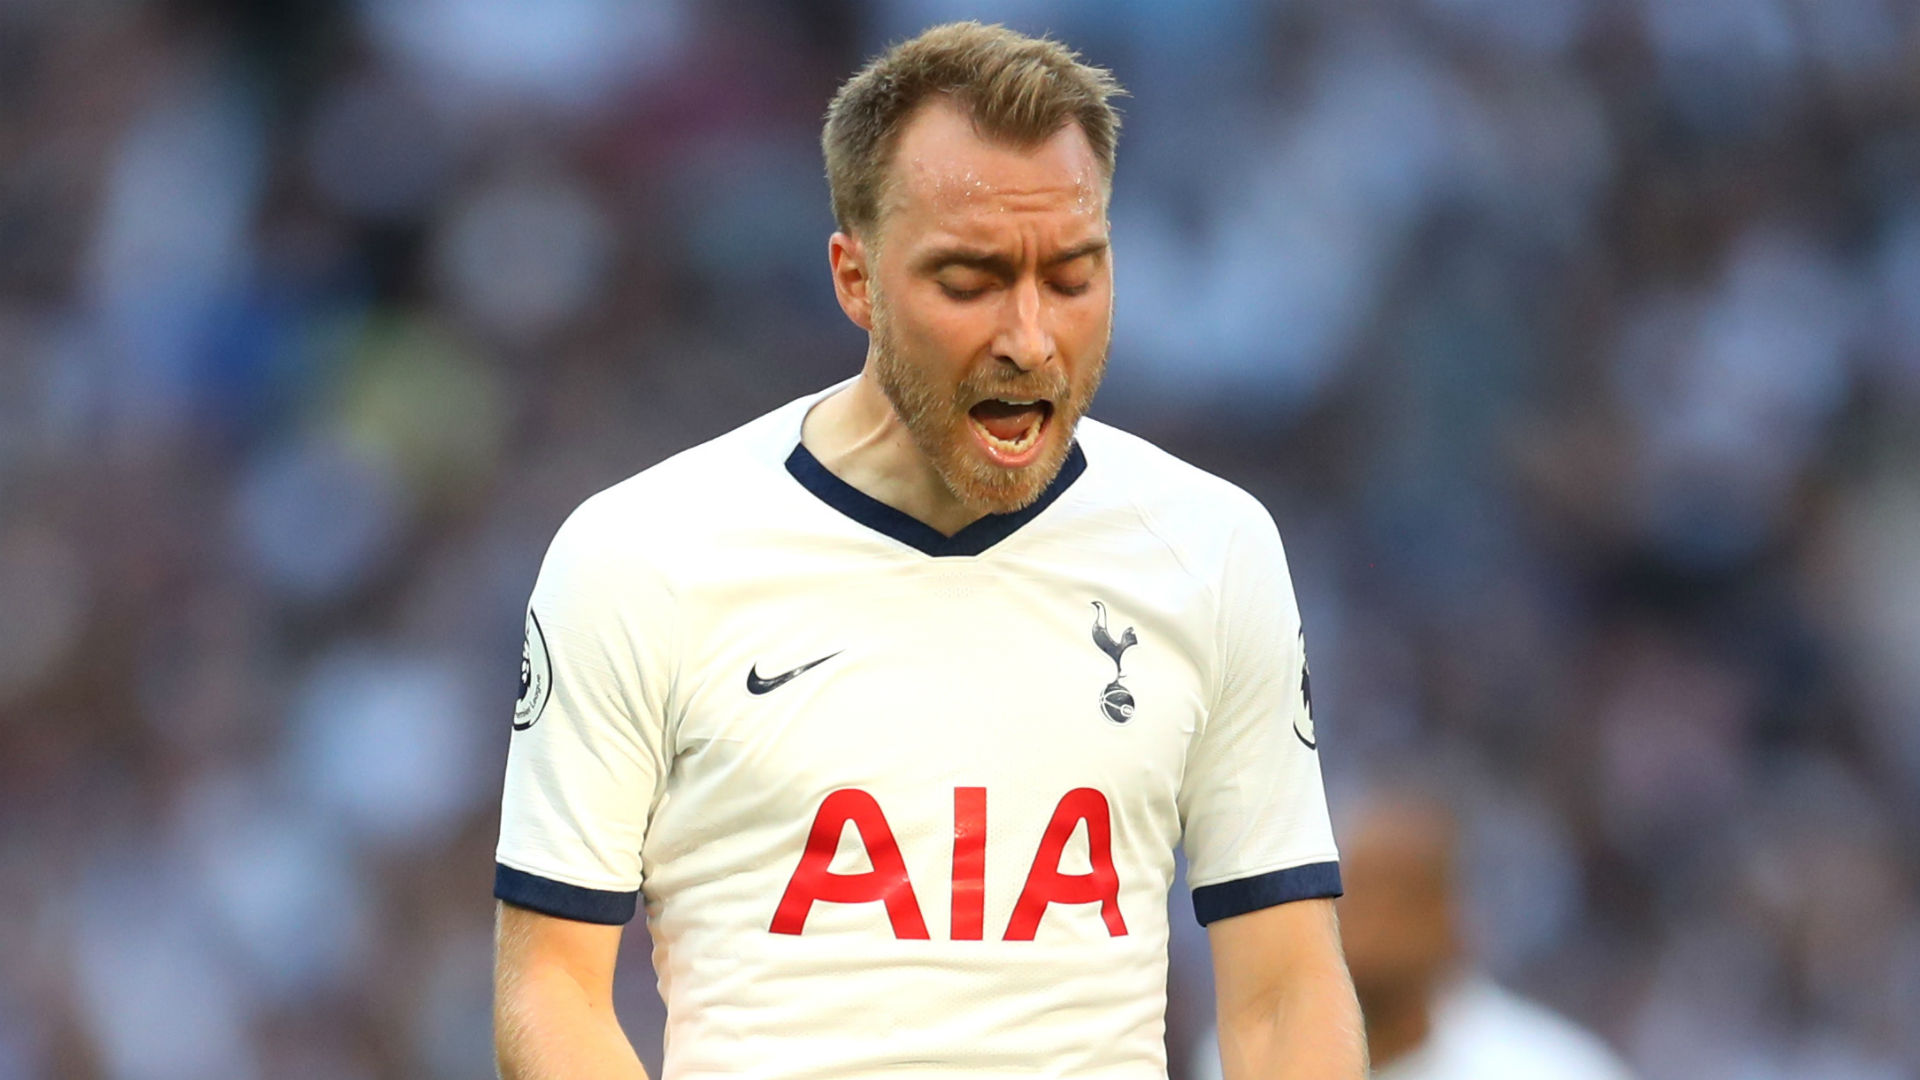 Christian Eriksen was on the bench for Tottenham as they lost to Newcastle, and Mauricio Pochettino was asked about his future again.